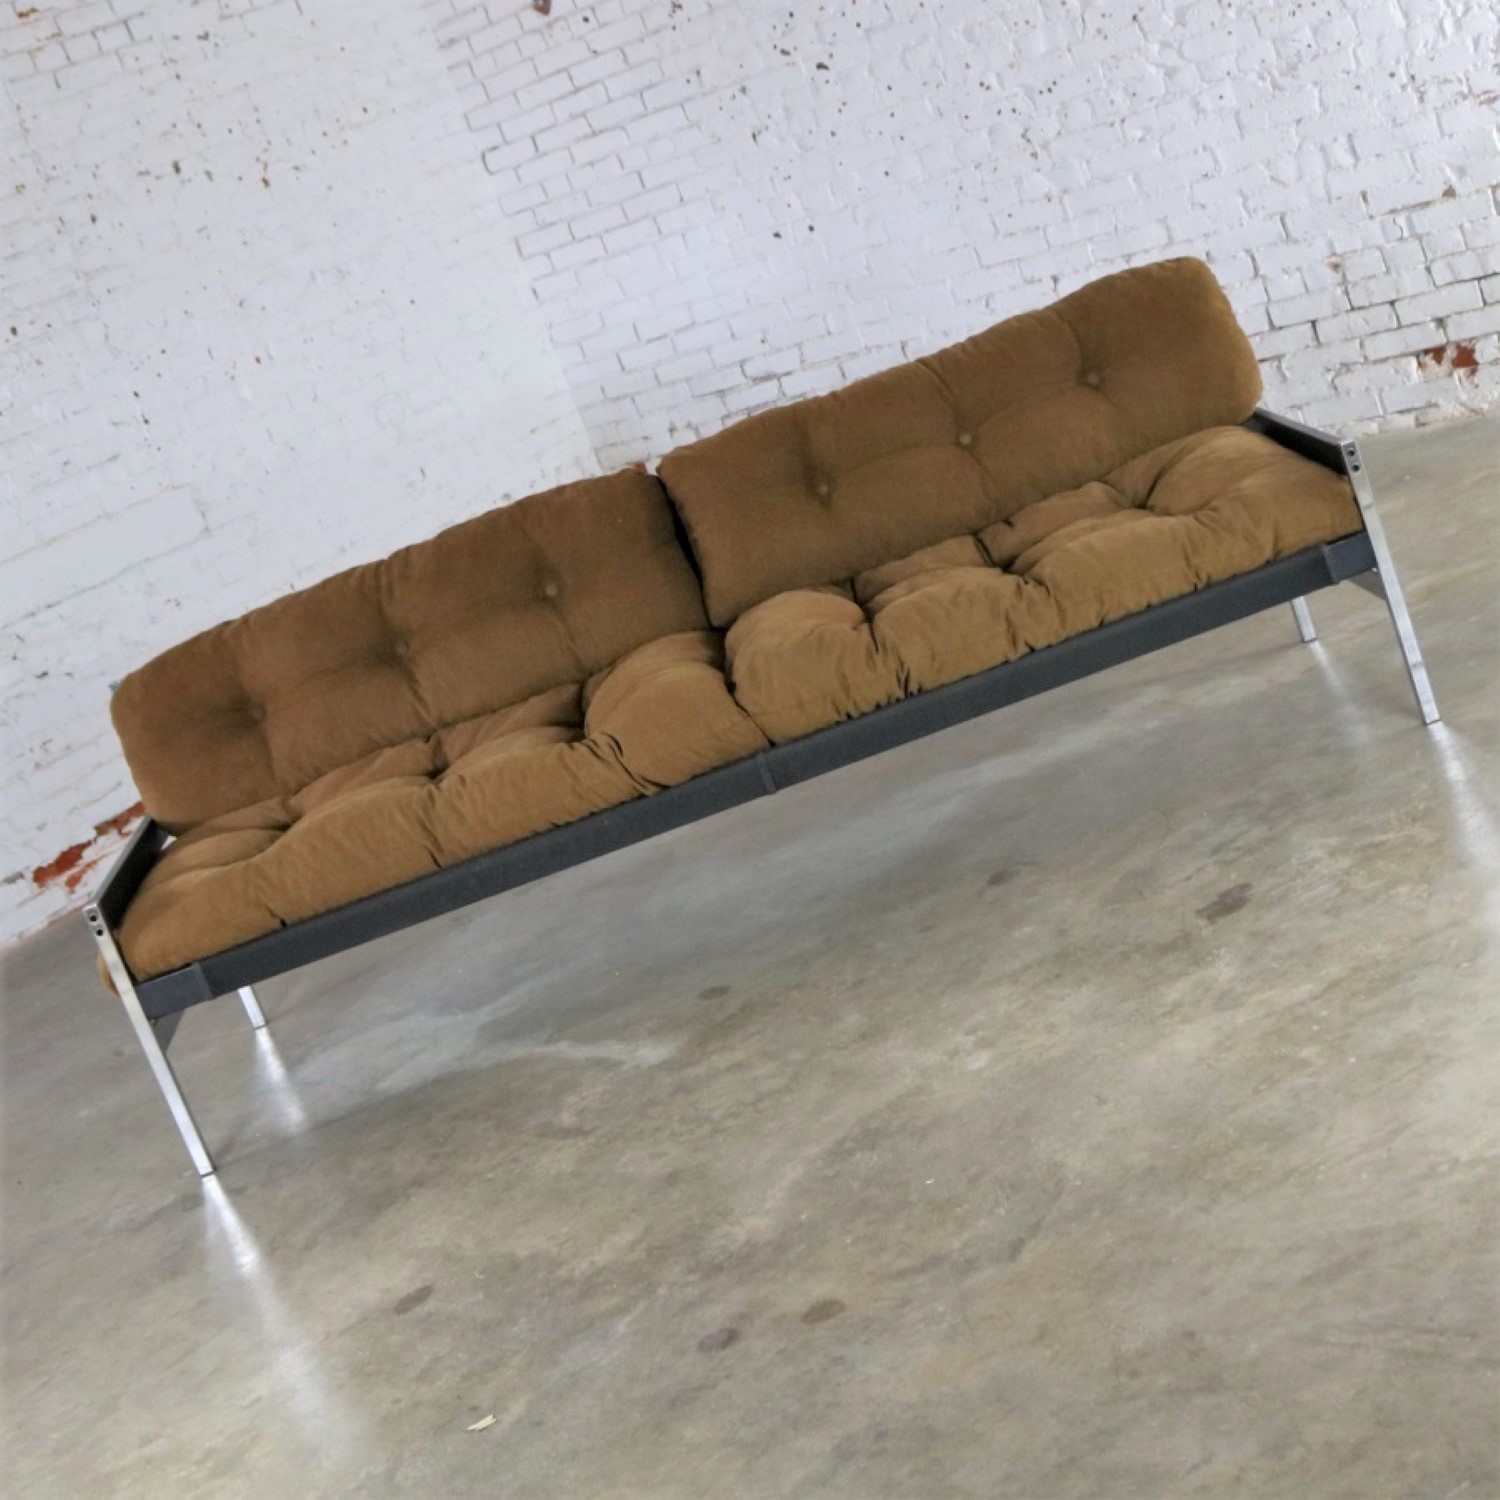 Landes Manufacturing Sling Sofa from The Encino Collection by Jerry Johnson